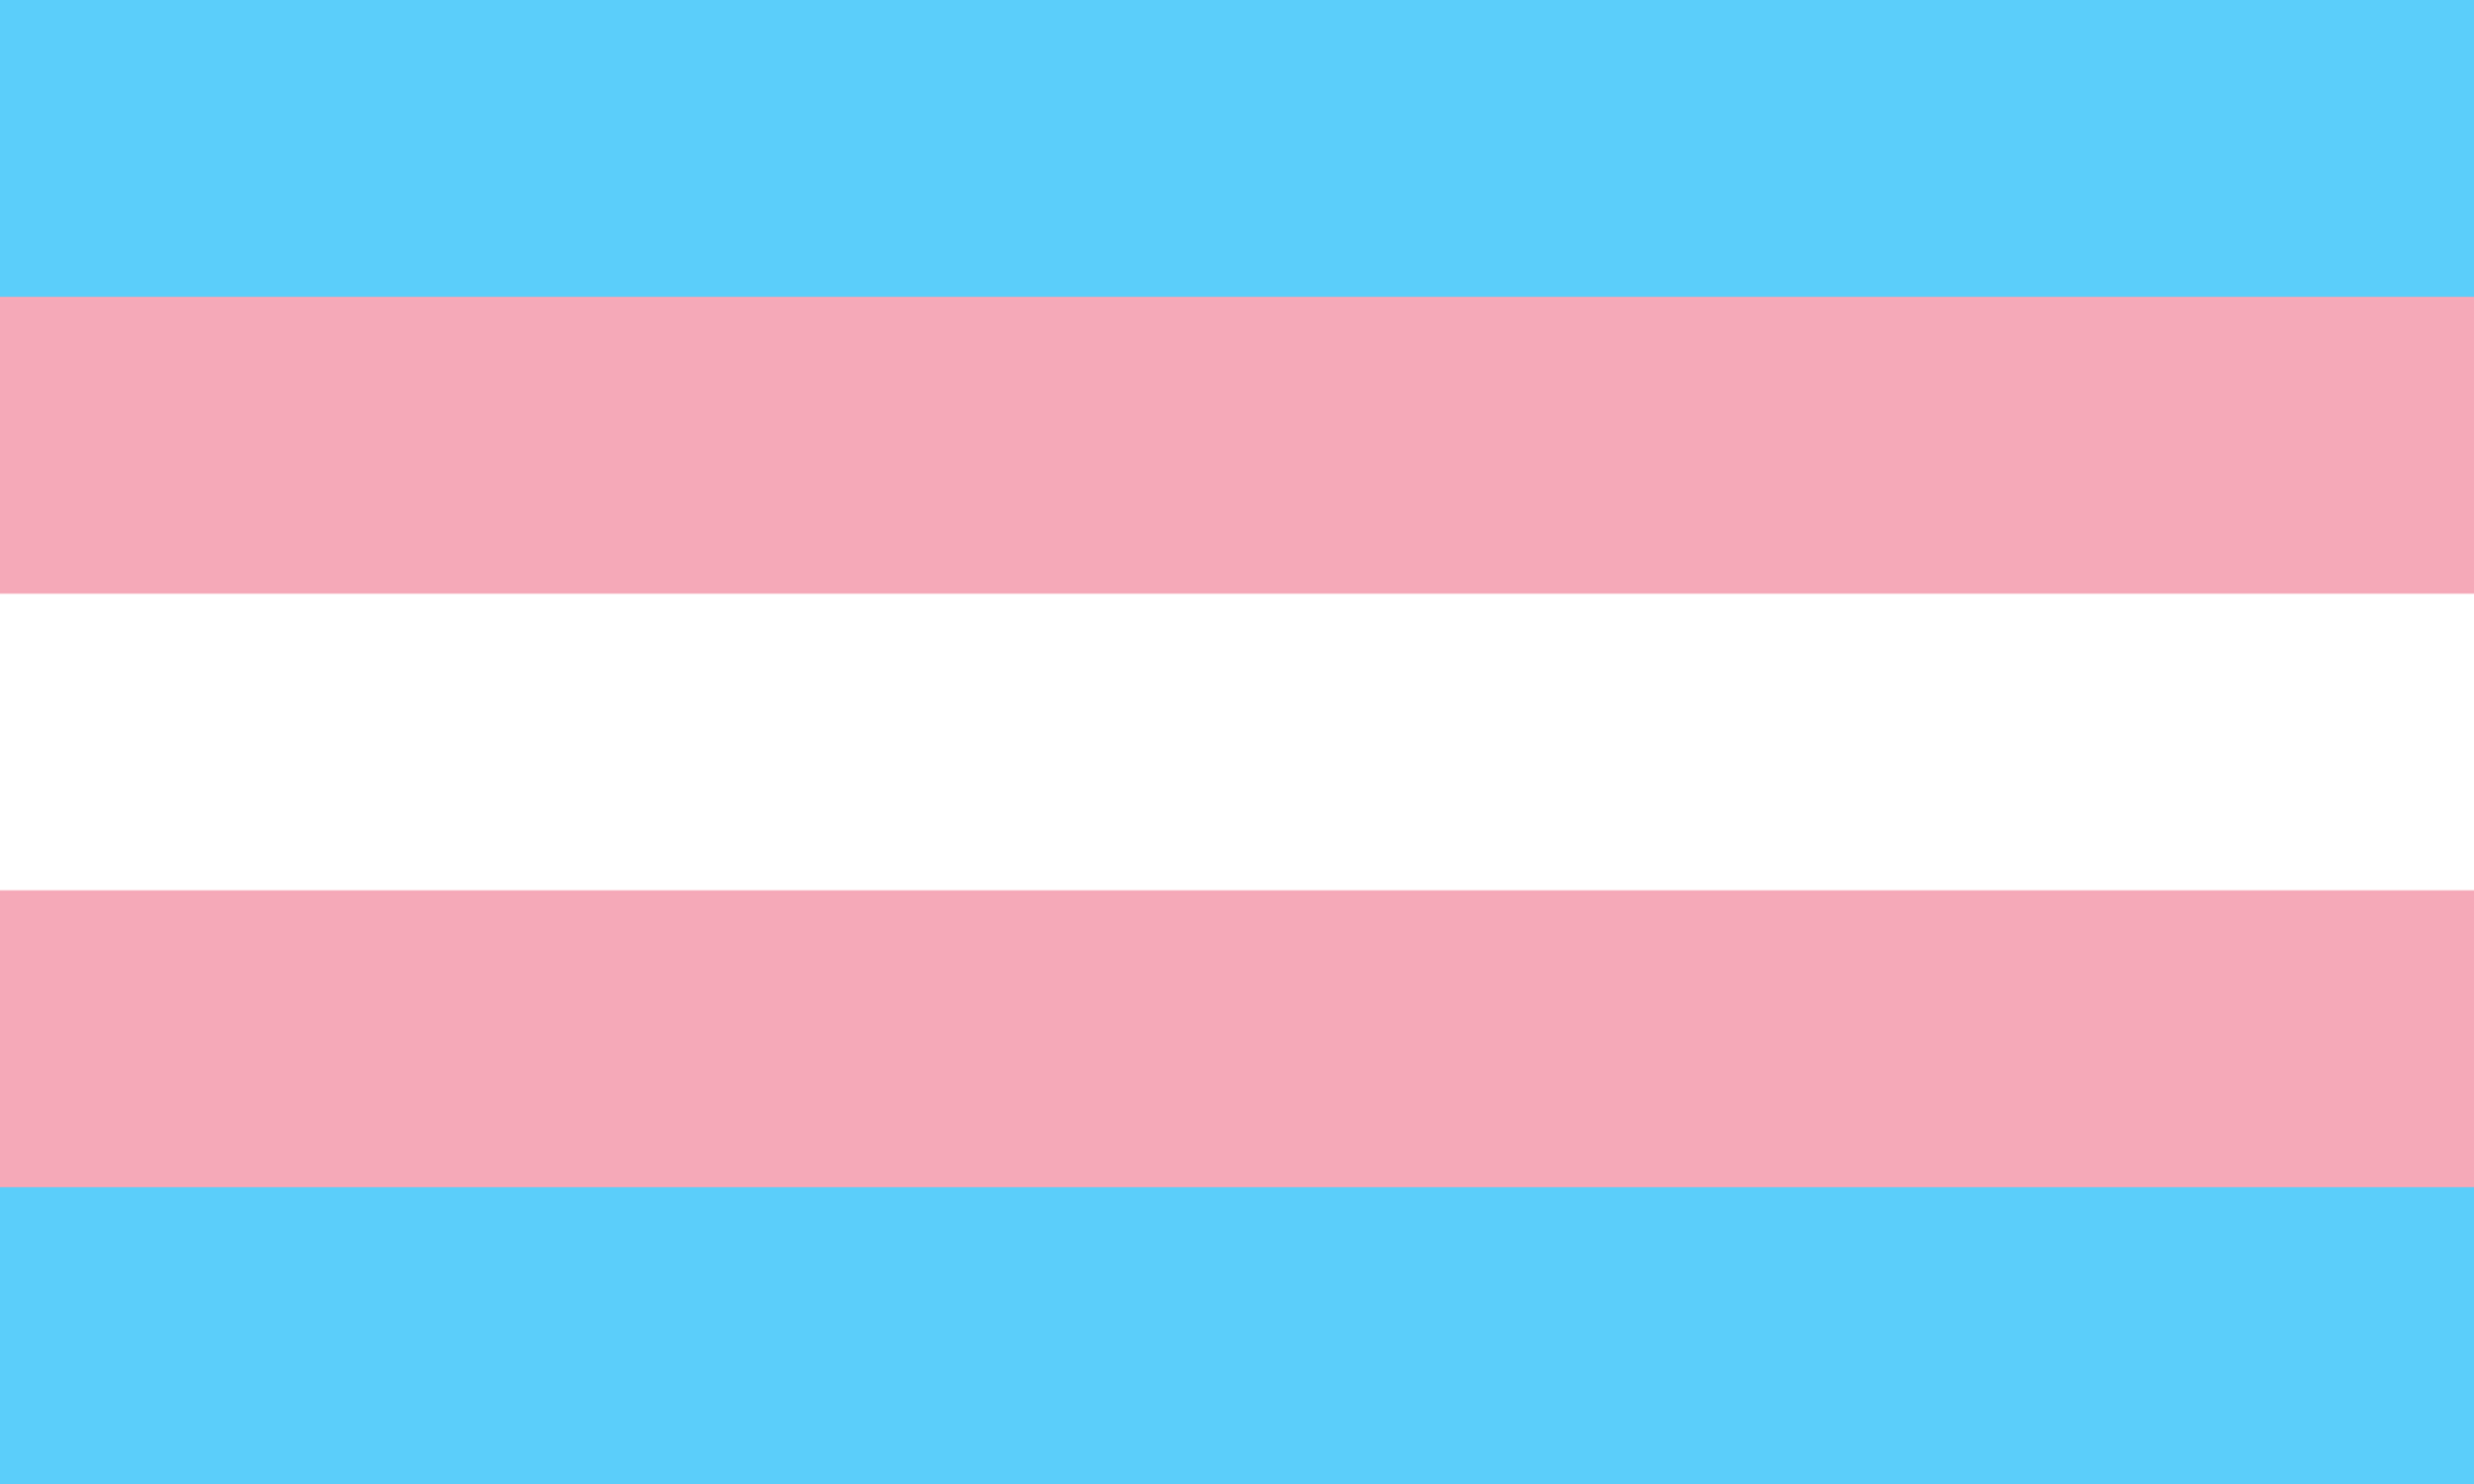 Transgender flag horizontal stripes of blue, pink, white, pink, and blue to represent the transition from one gender to another